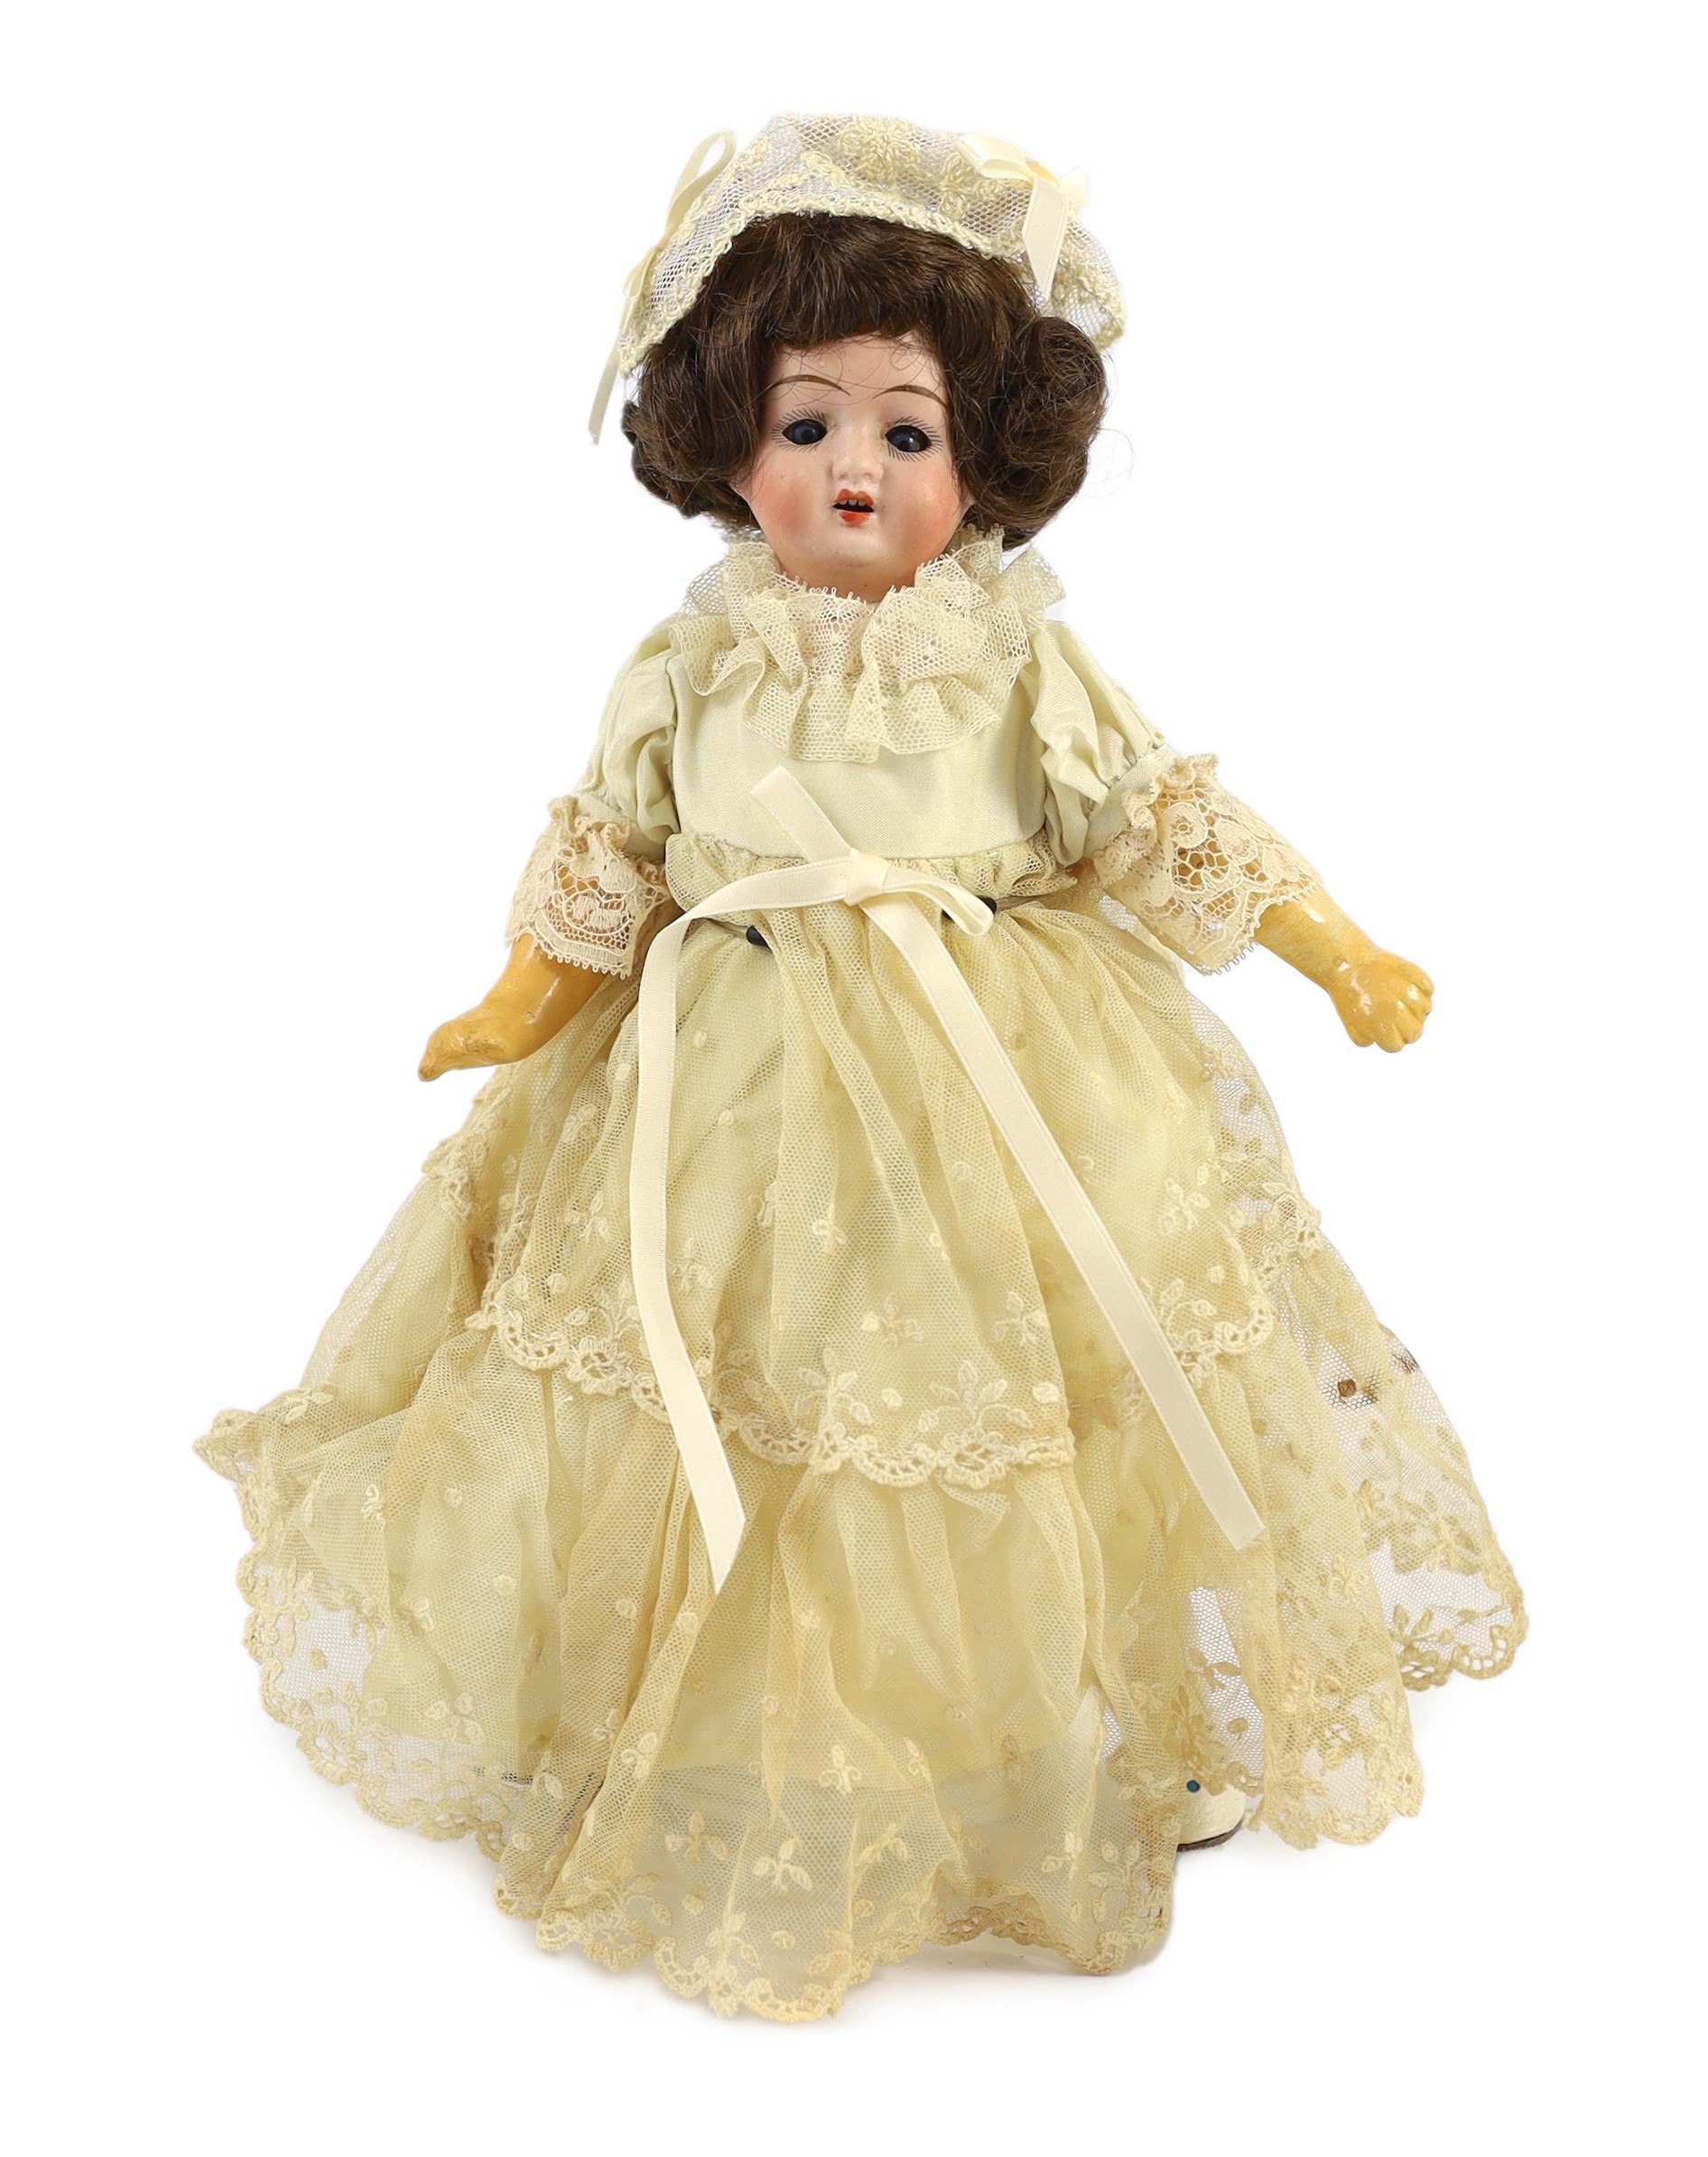 A bisque doll, probably by Gebruder Kuhnlenz, German, circa 1891, 11in.